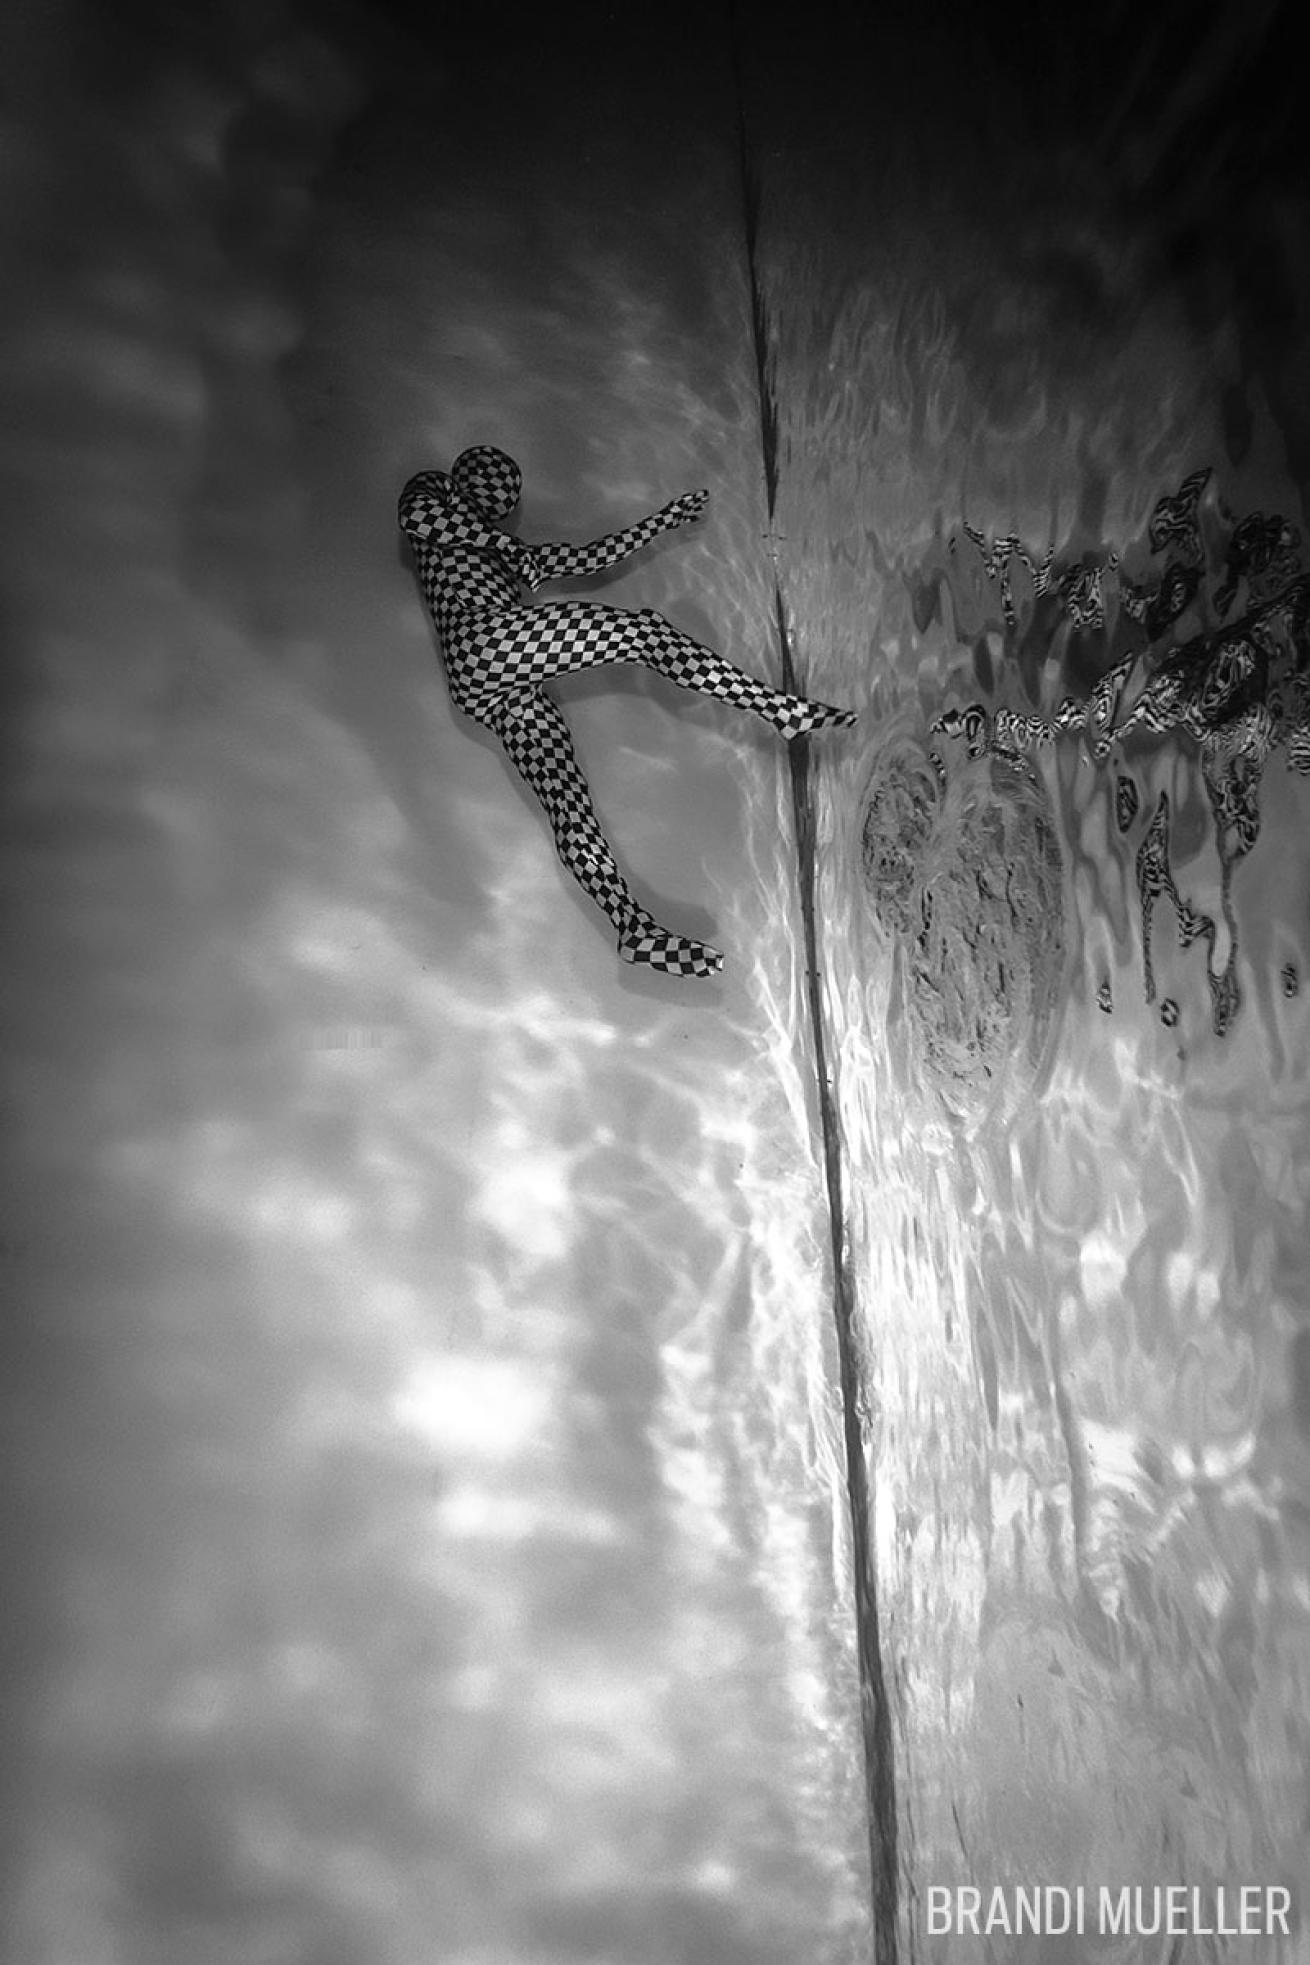 Conceptual black and white underwater photograph